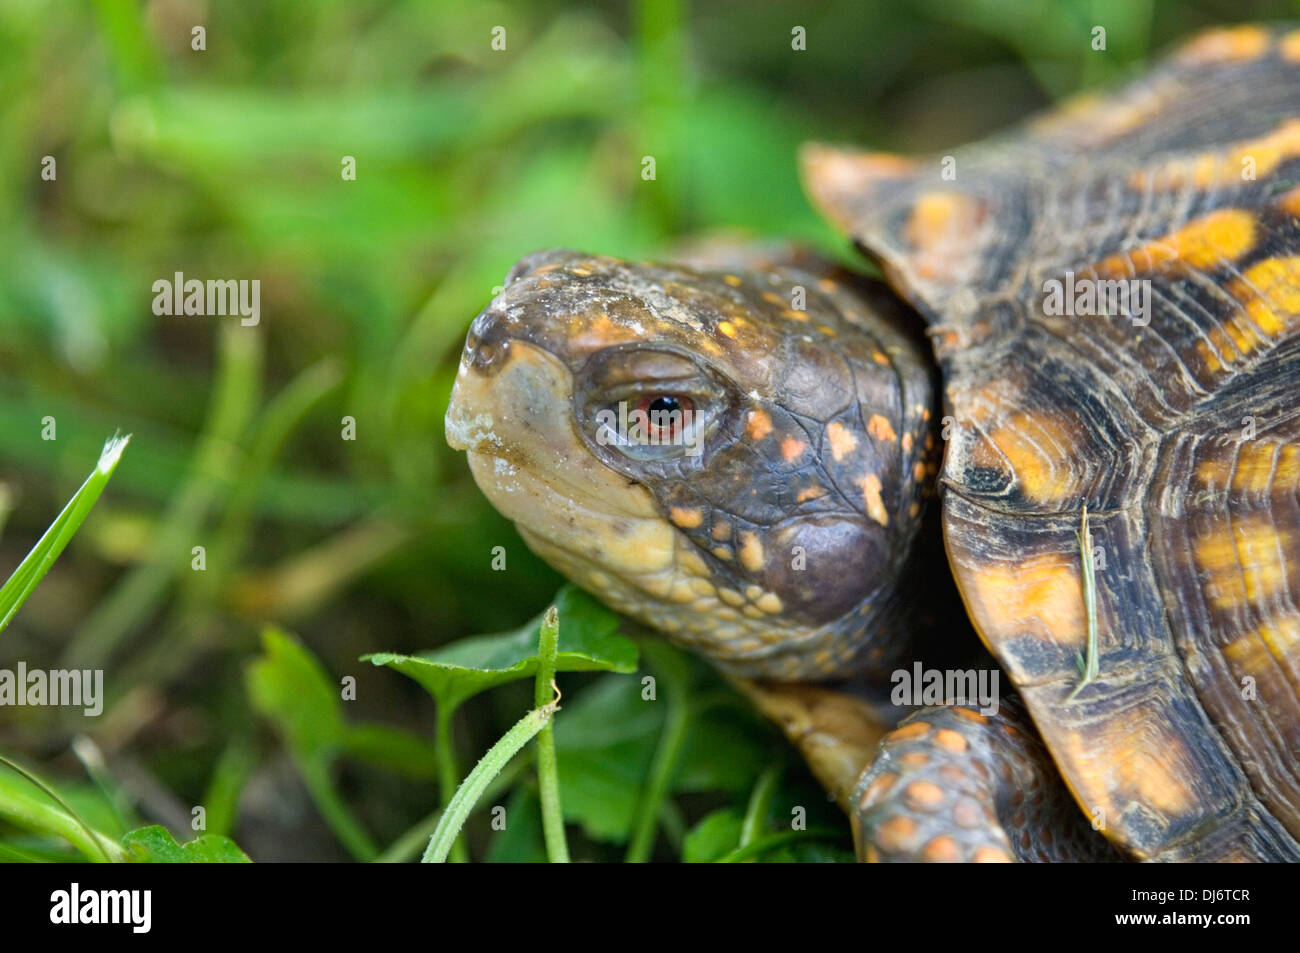 Close-up of an Eastern Box Turtle Stock Photo